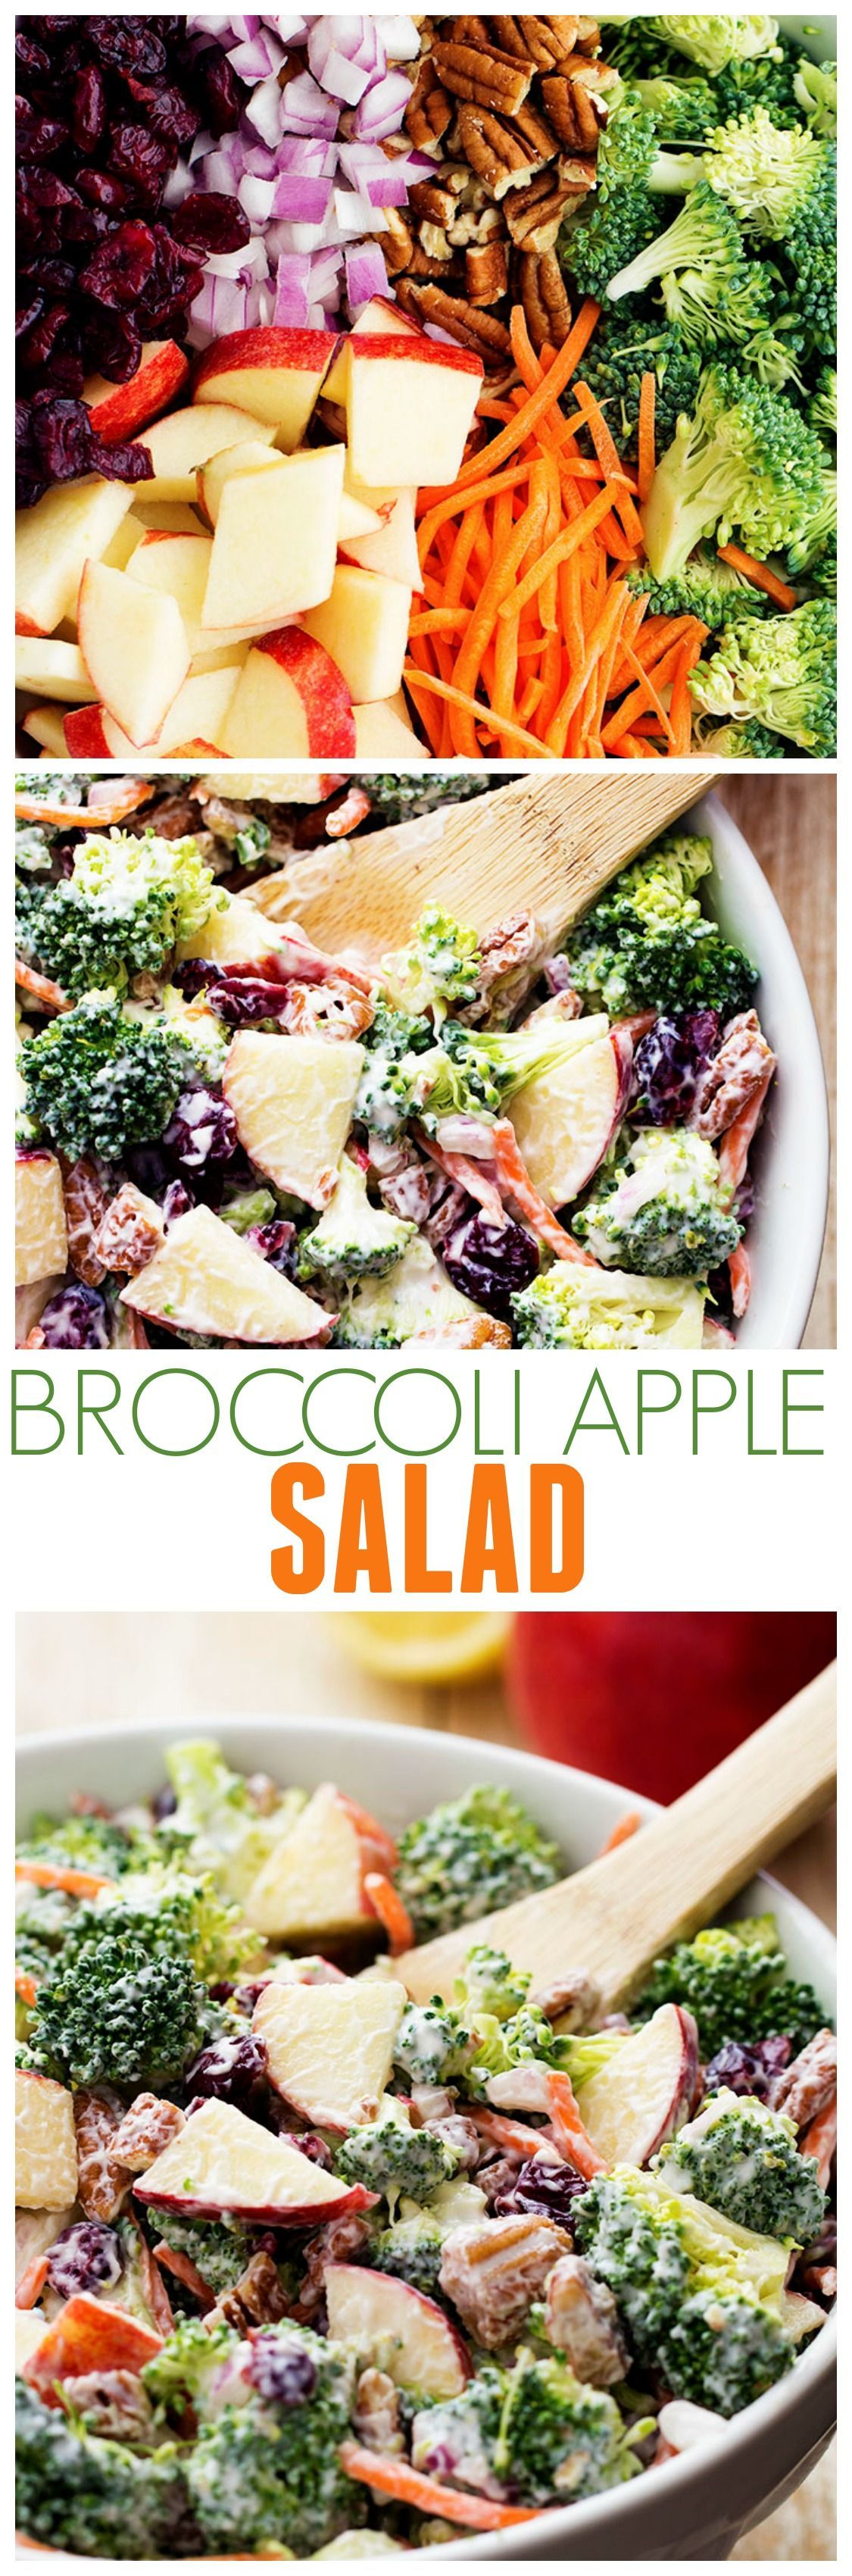 This Broccoli Apple Salad will be one of the best salads that you make!! So many amazing flavors and textures and the creamy